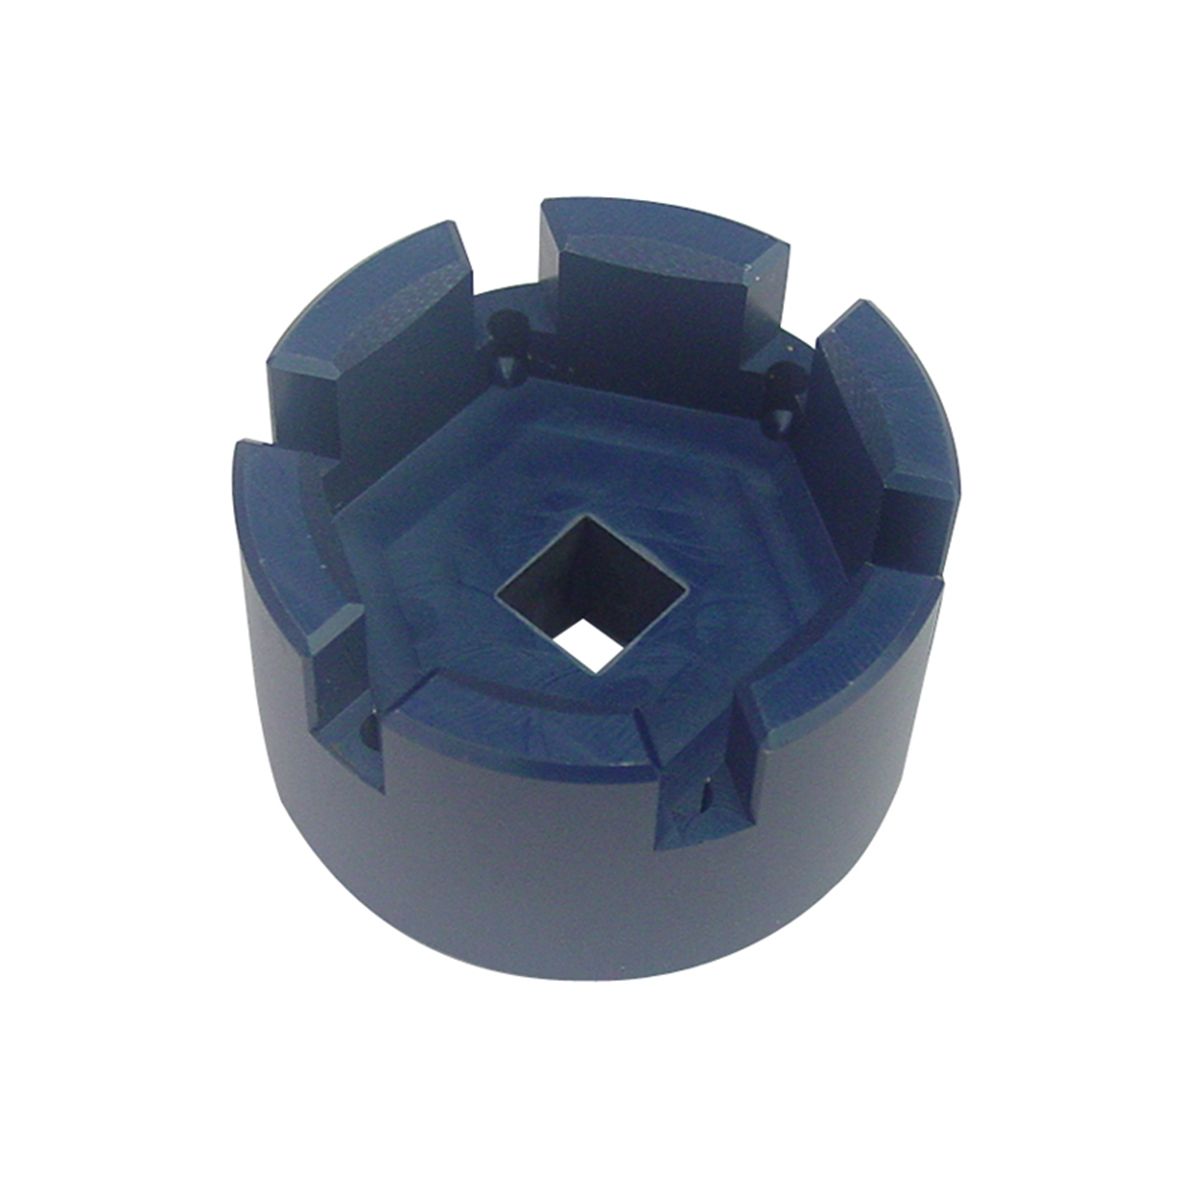 3/8 Inch Drive Dual Ford Fuel Filter Cap Tool,